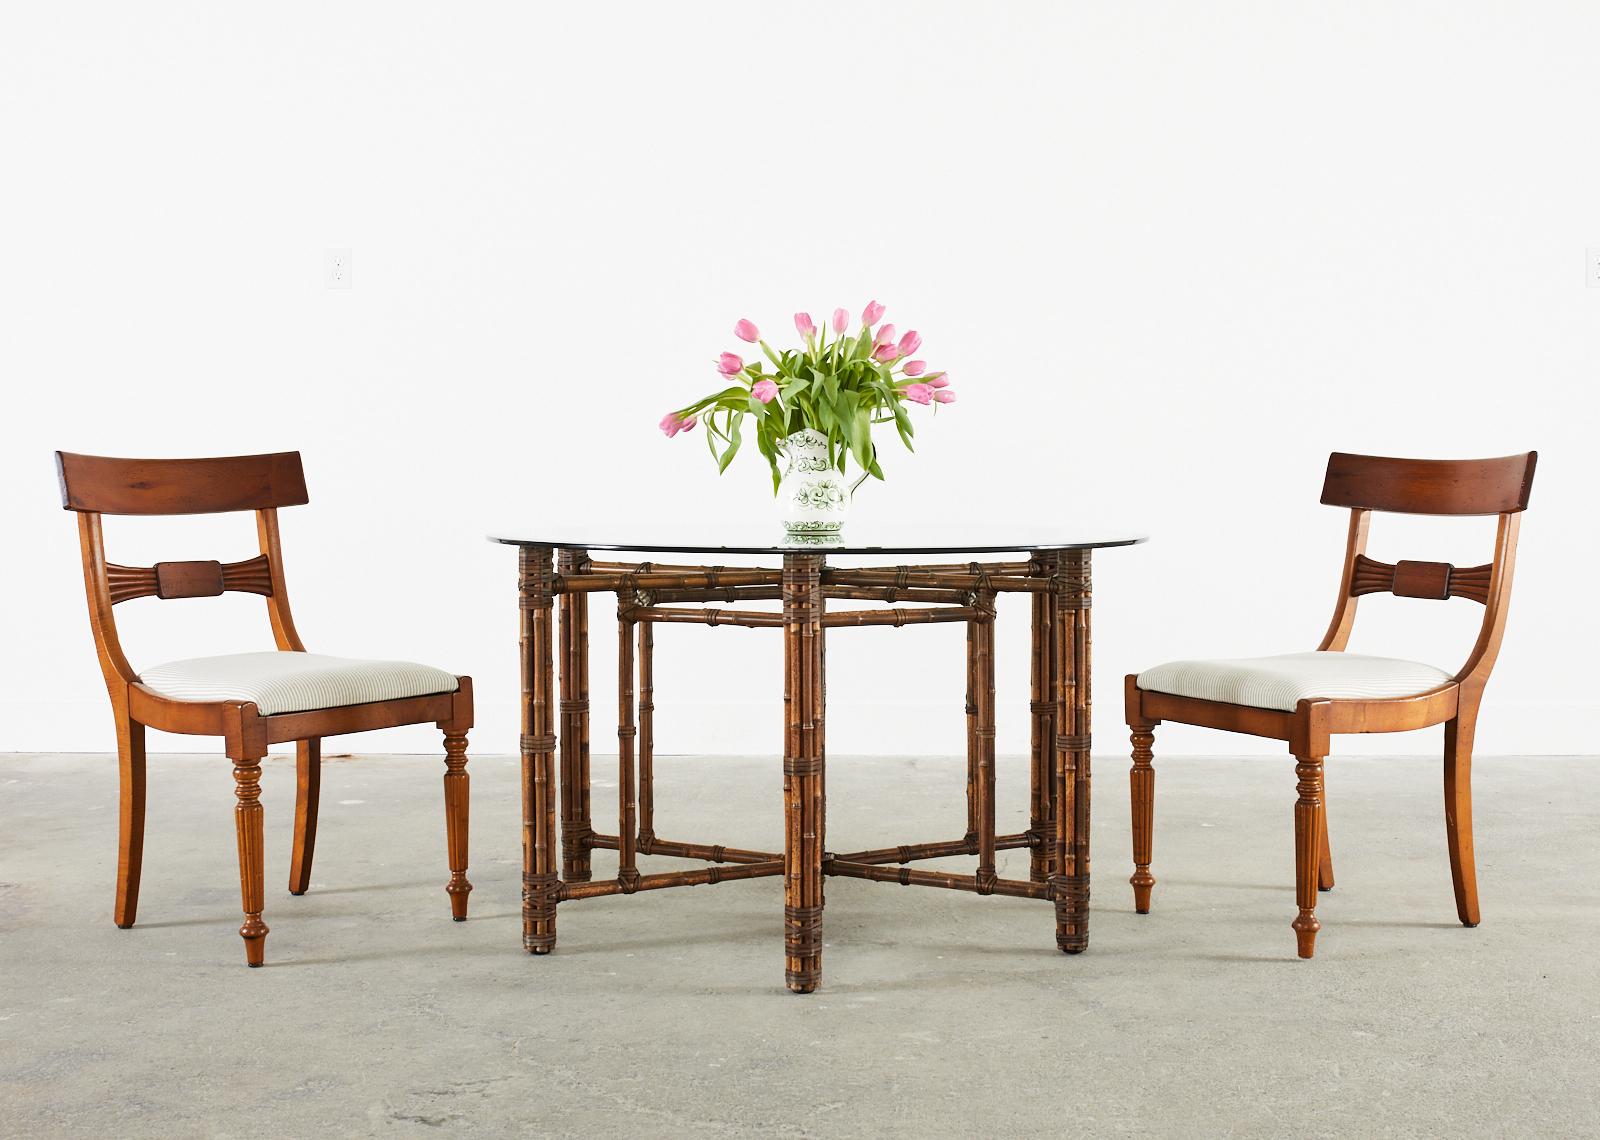 Fantastic set of nine Italian dining chairs made in the regency taste by Baker Milling Road. The chairs feature generous wood frames with a rich finish and a subtle intentionally distressed patina. The seats have a wide tablet backrest with a bow